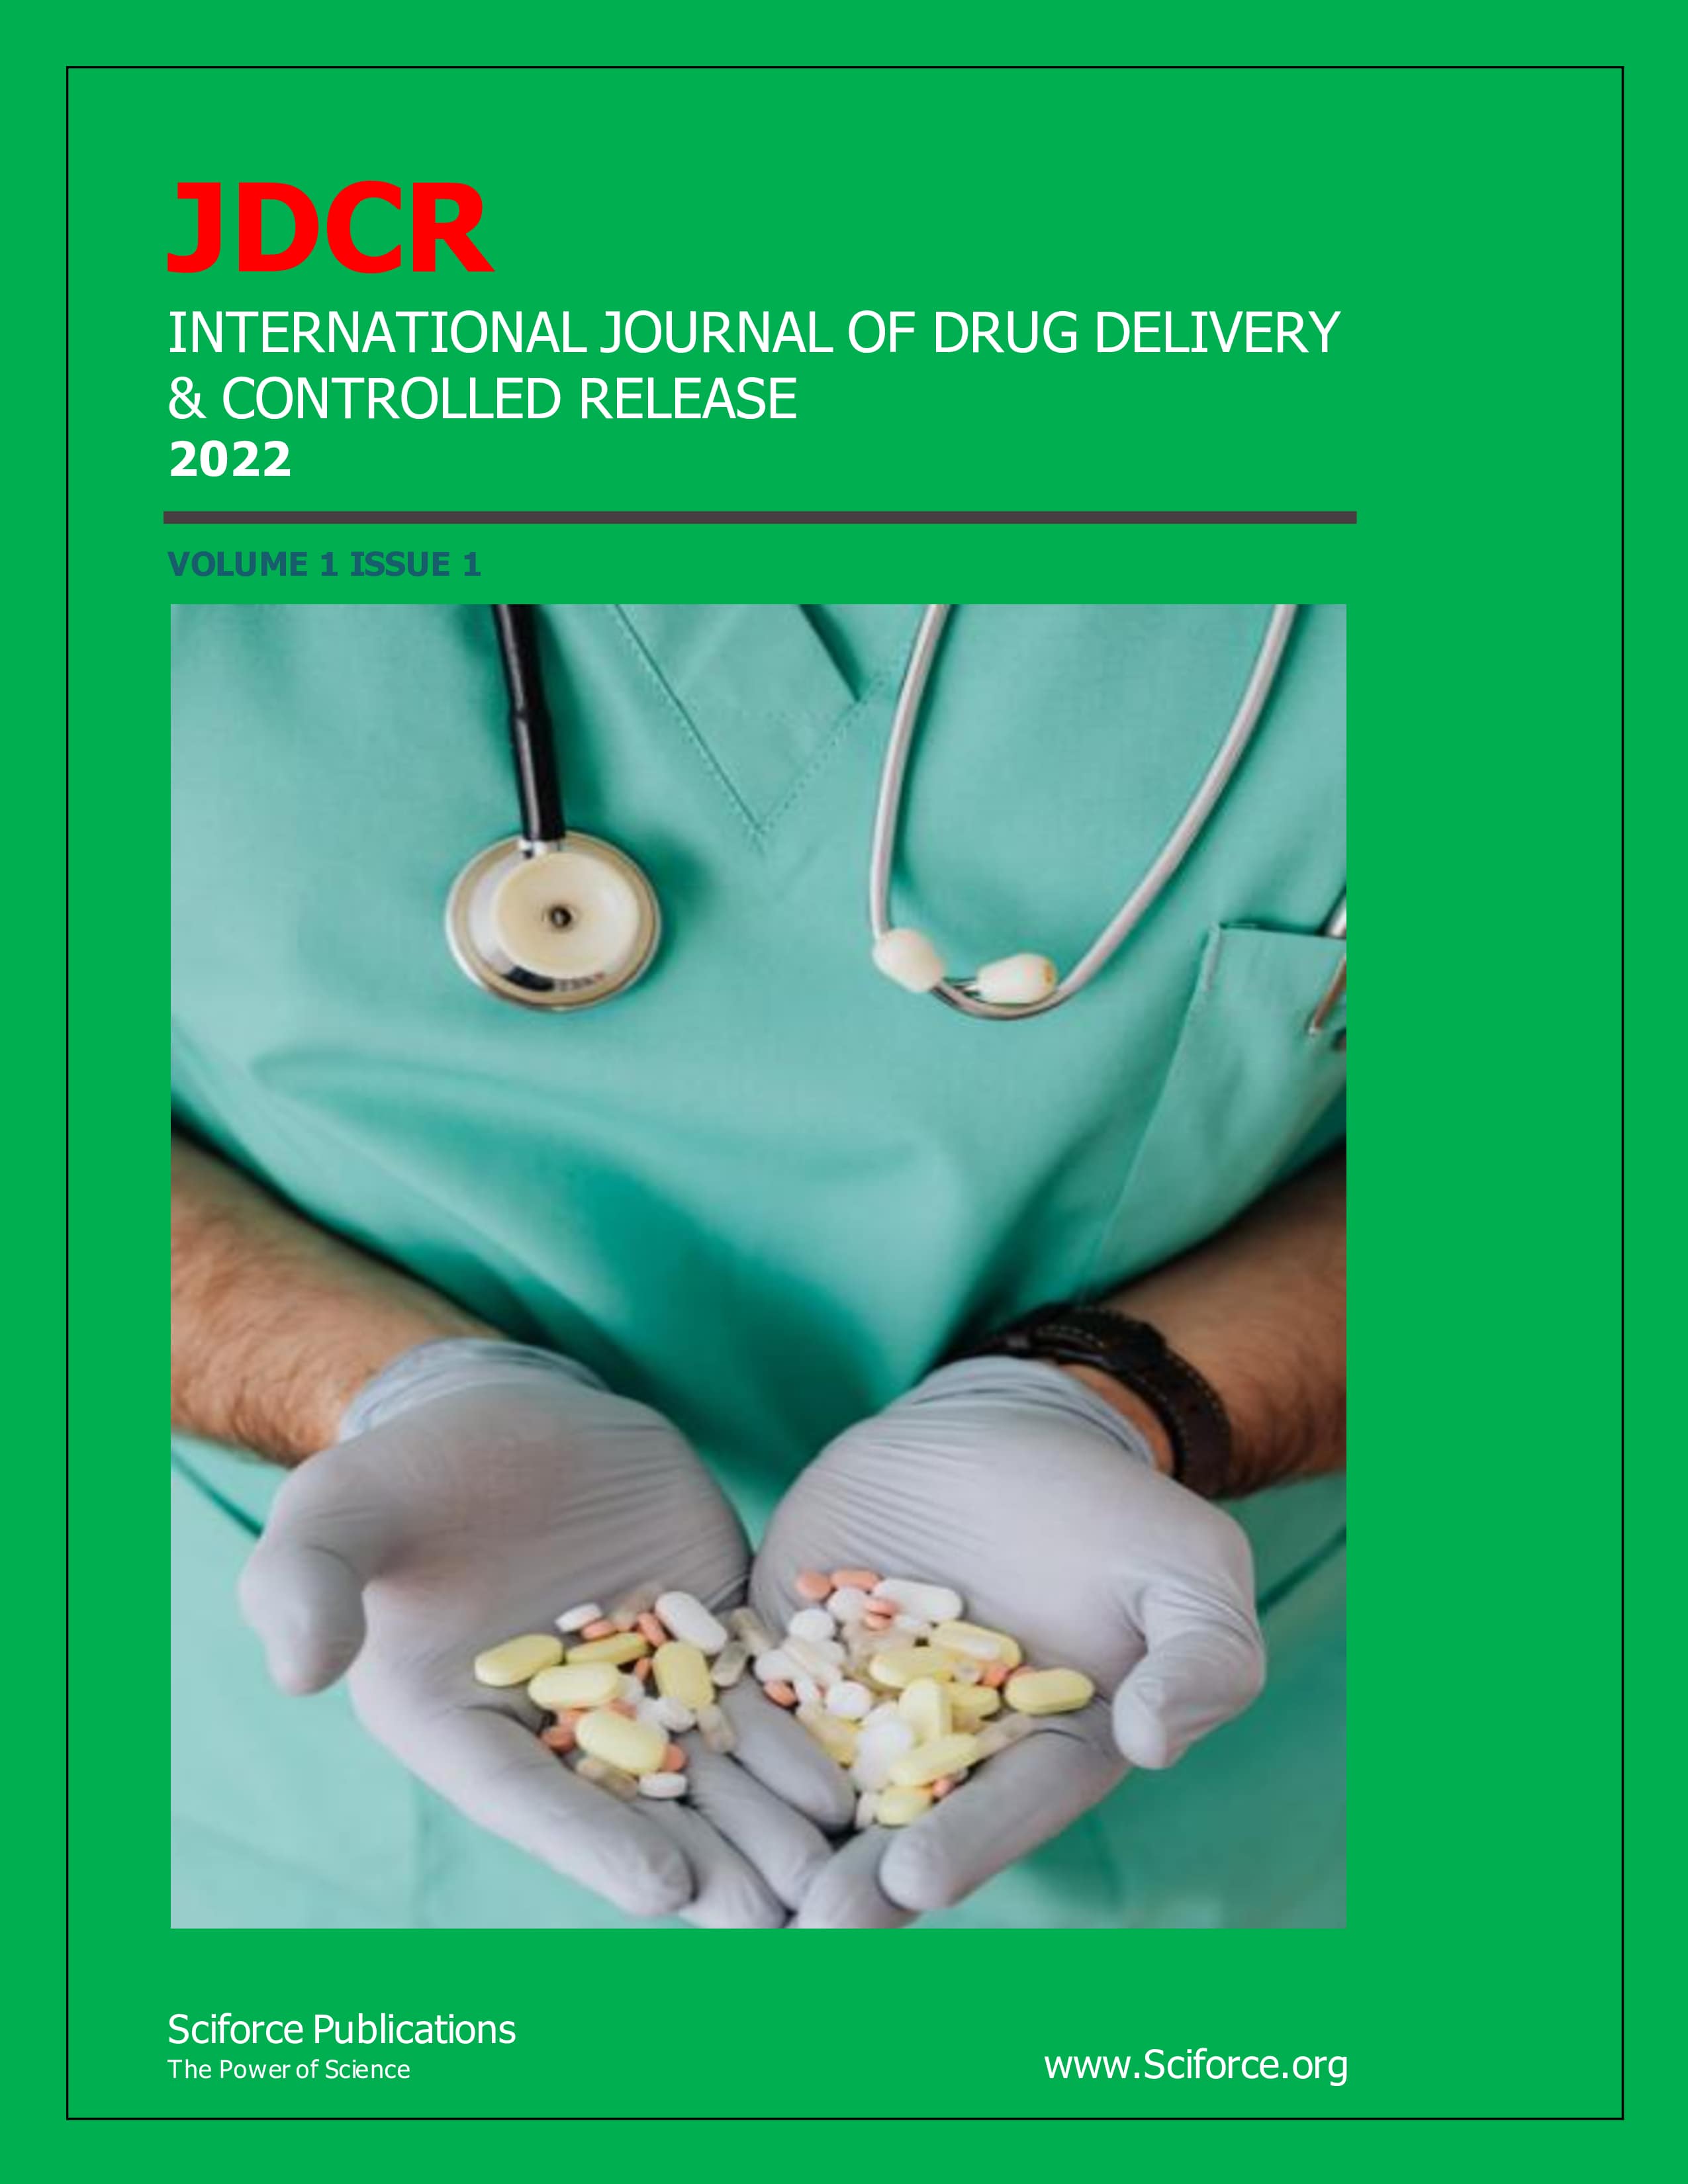 International Journal of Drug Delivery & Controlled Release